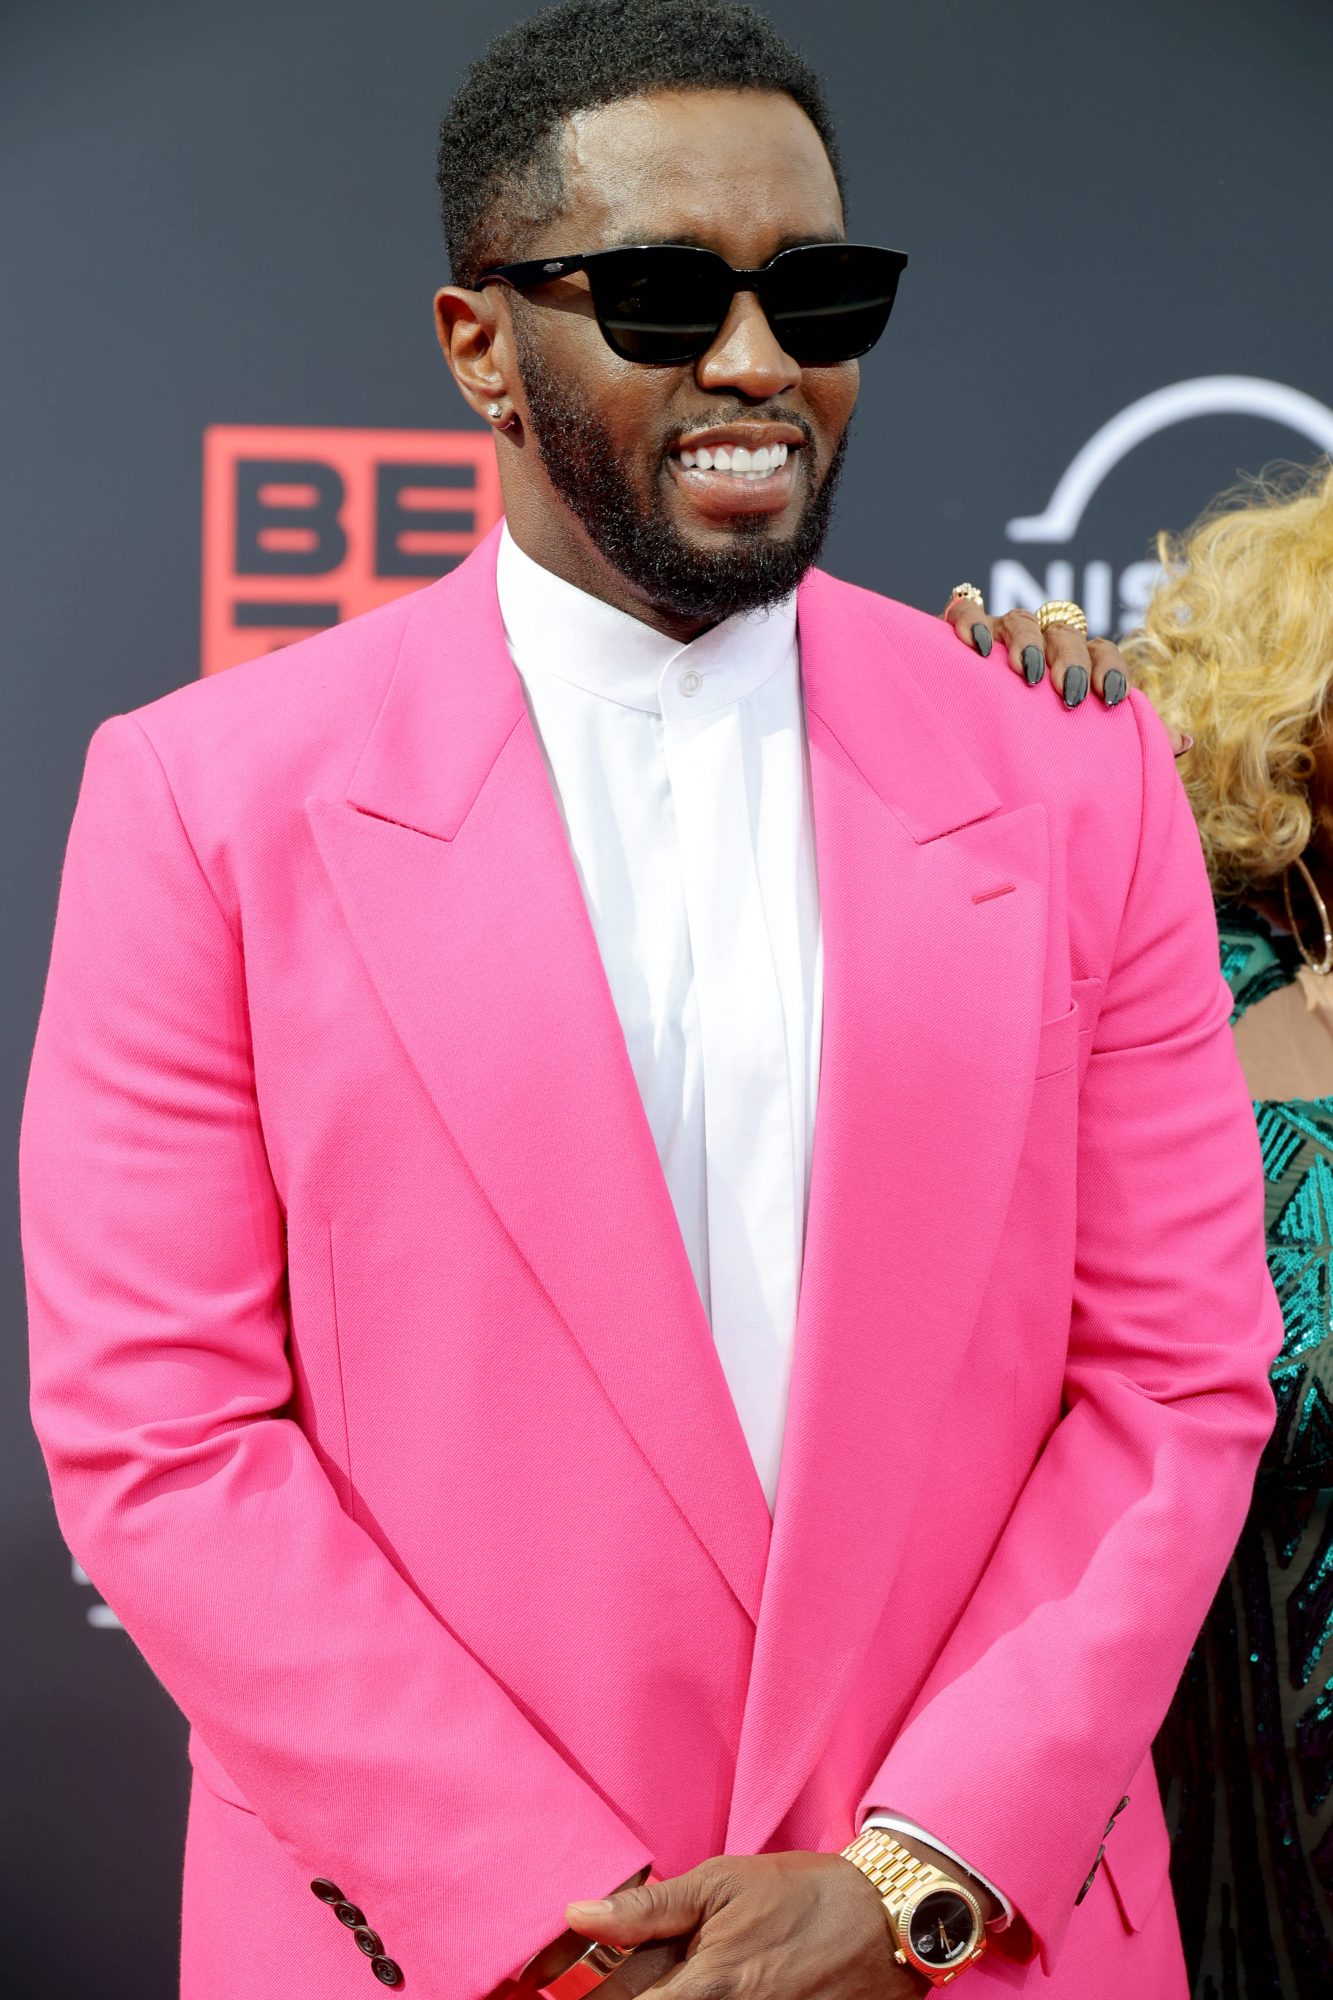 Sean "Diddy" Combs attends the 2022 BET Awards